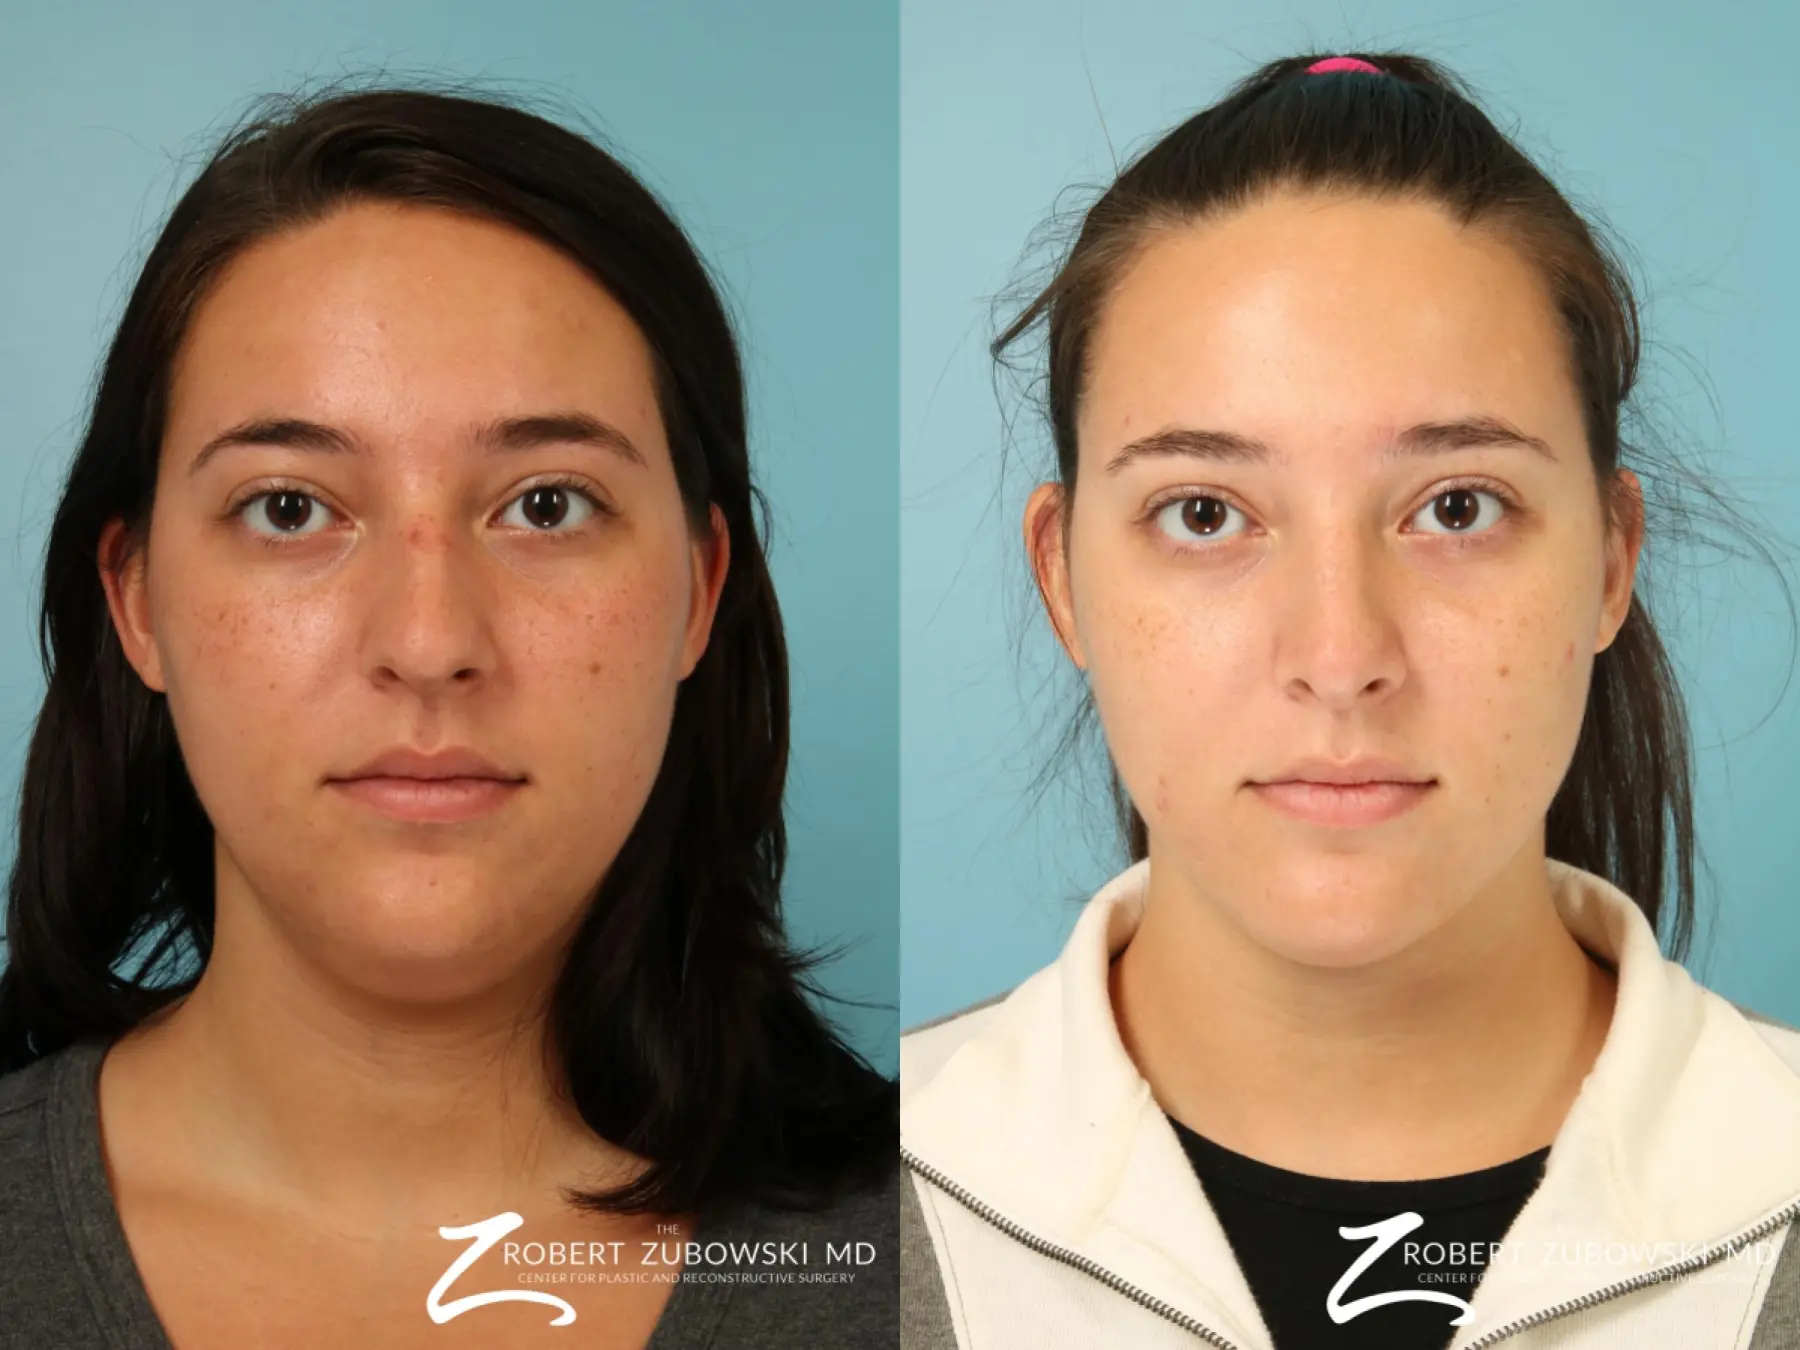 Liposuction Of The Neck: Patient 1 - Before and After  